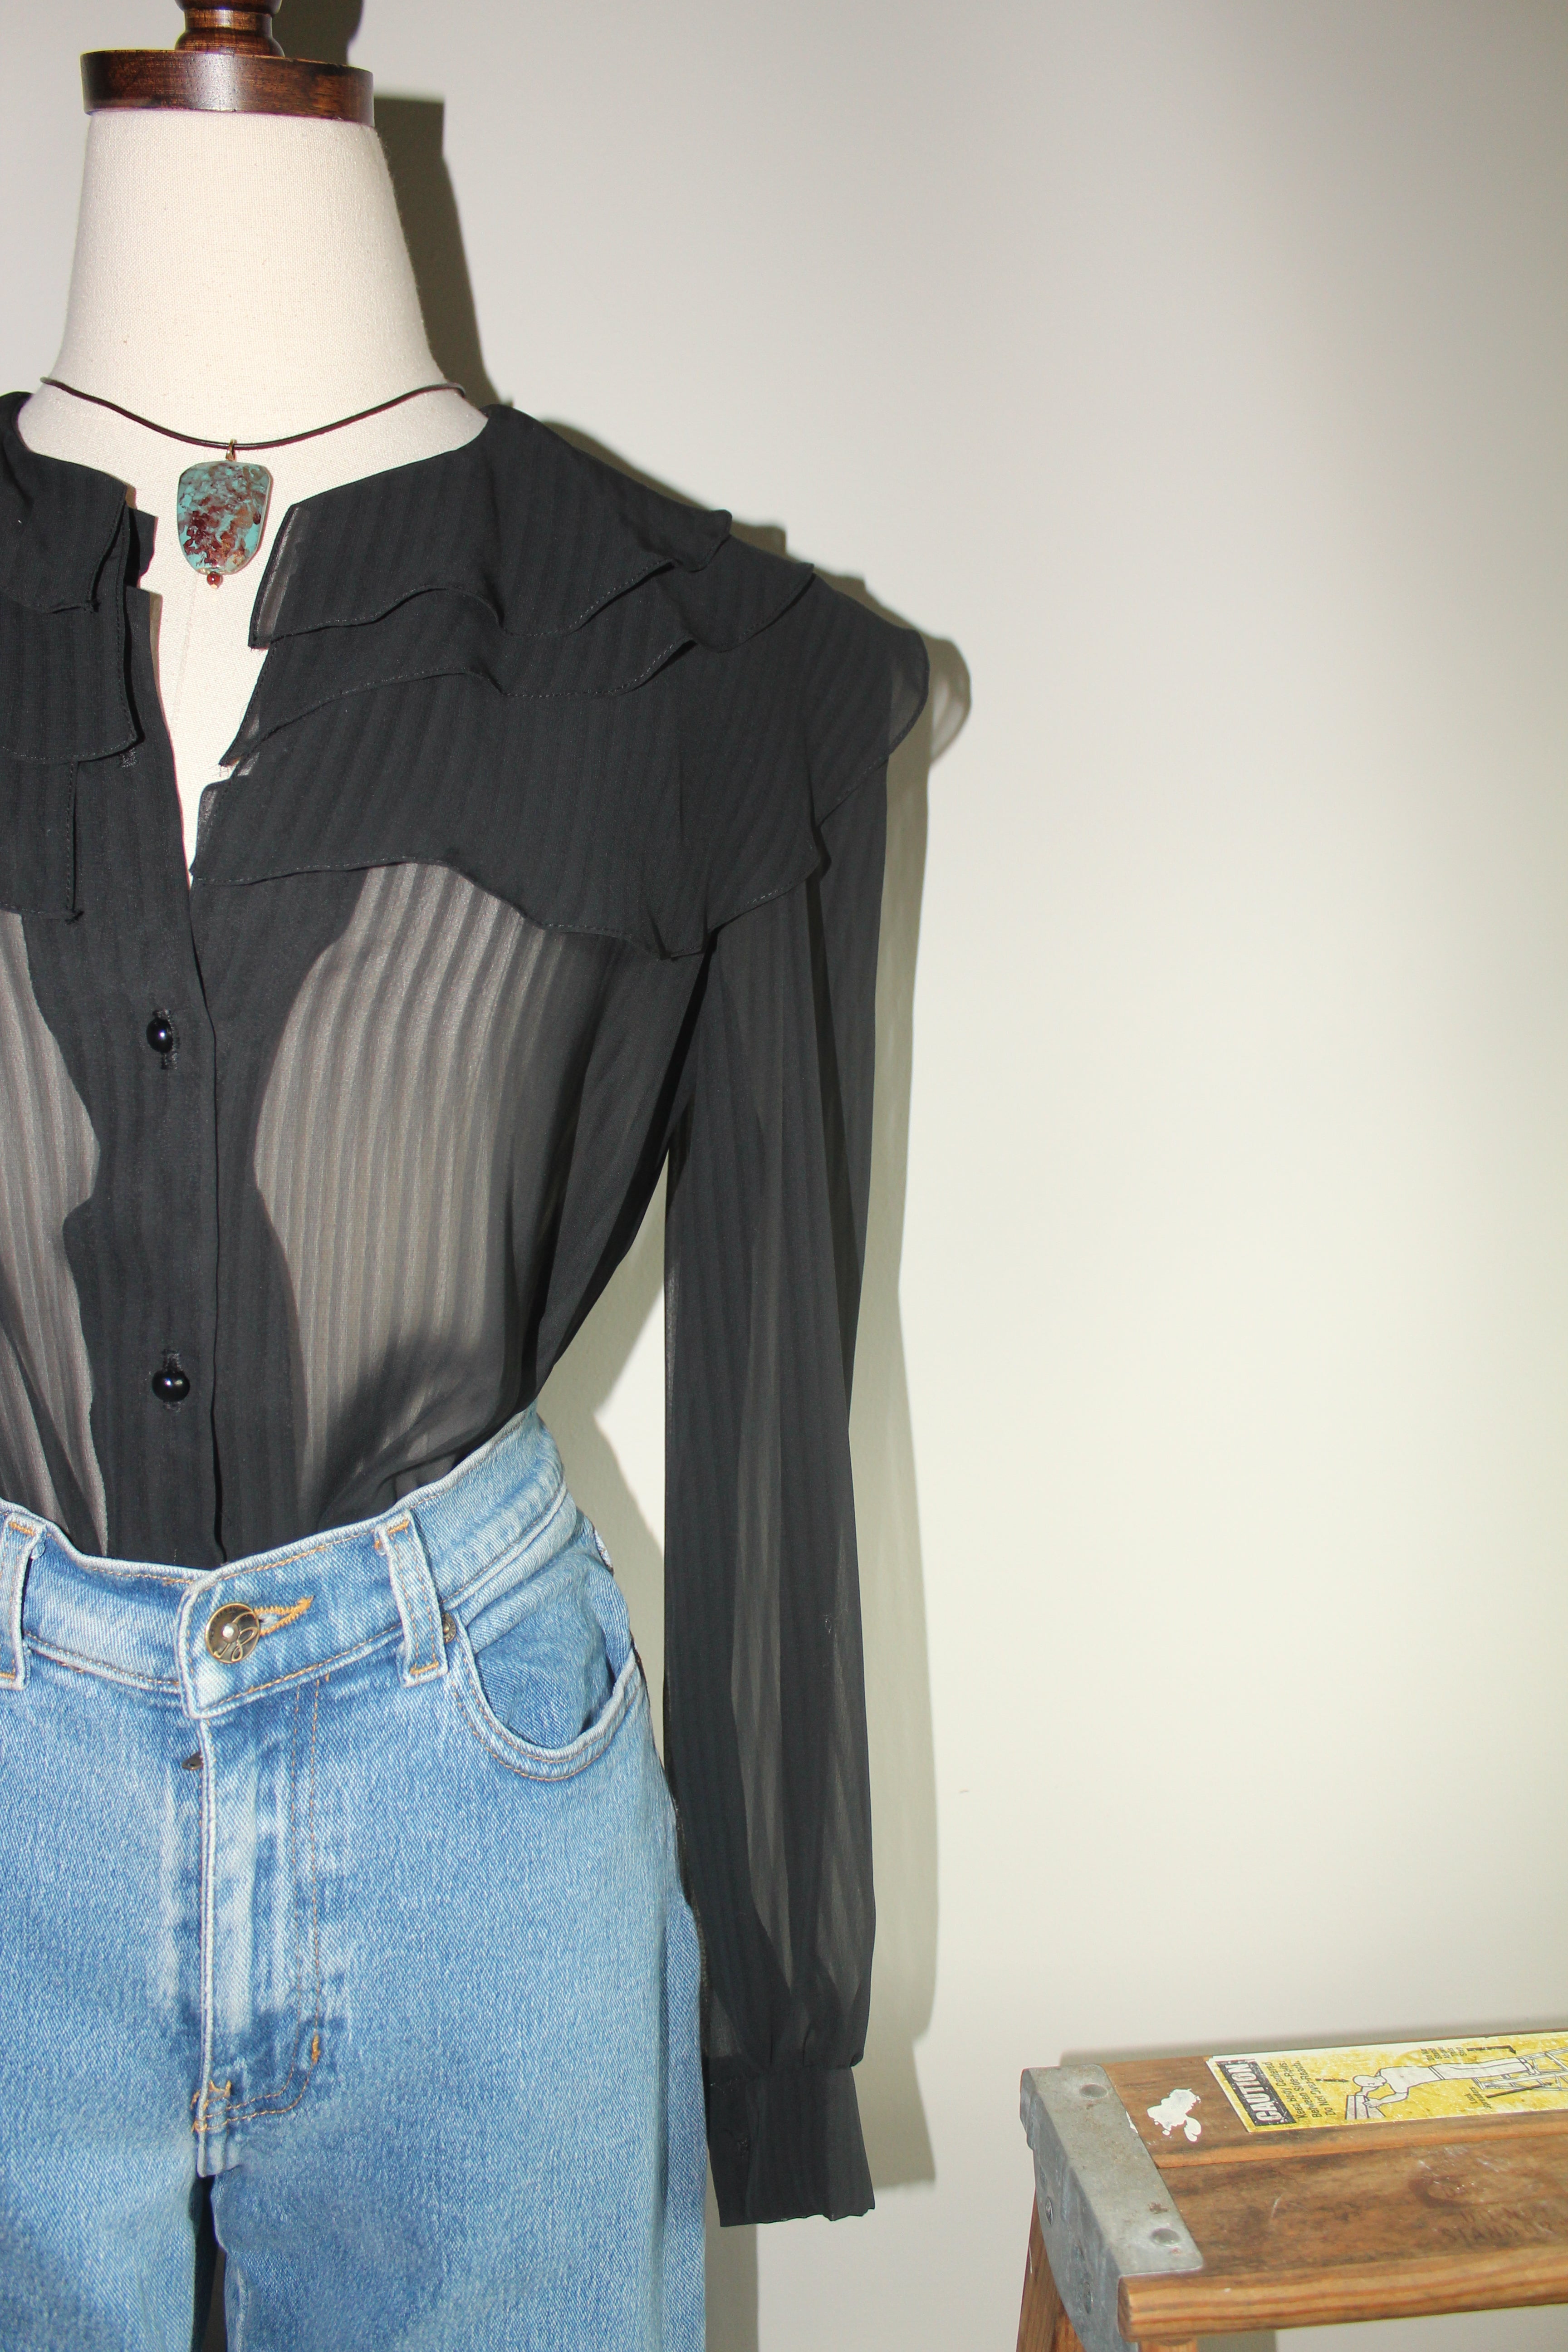 Vintage 90s Ruffled Sheer Striped Blouse (M)